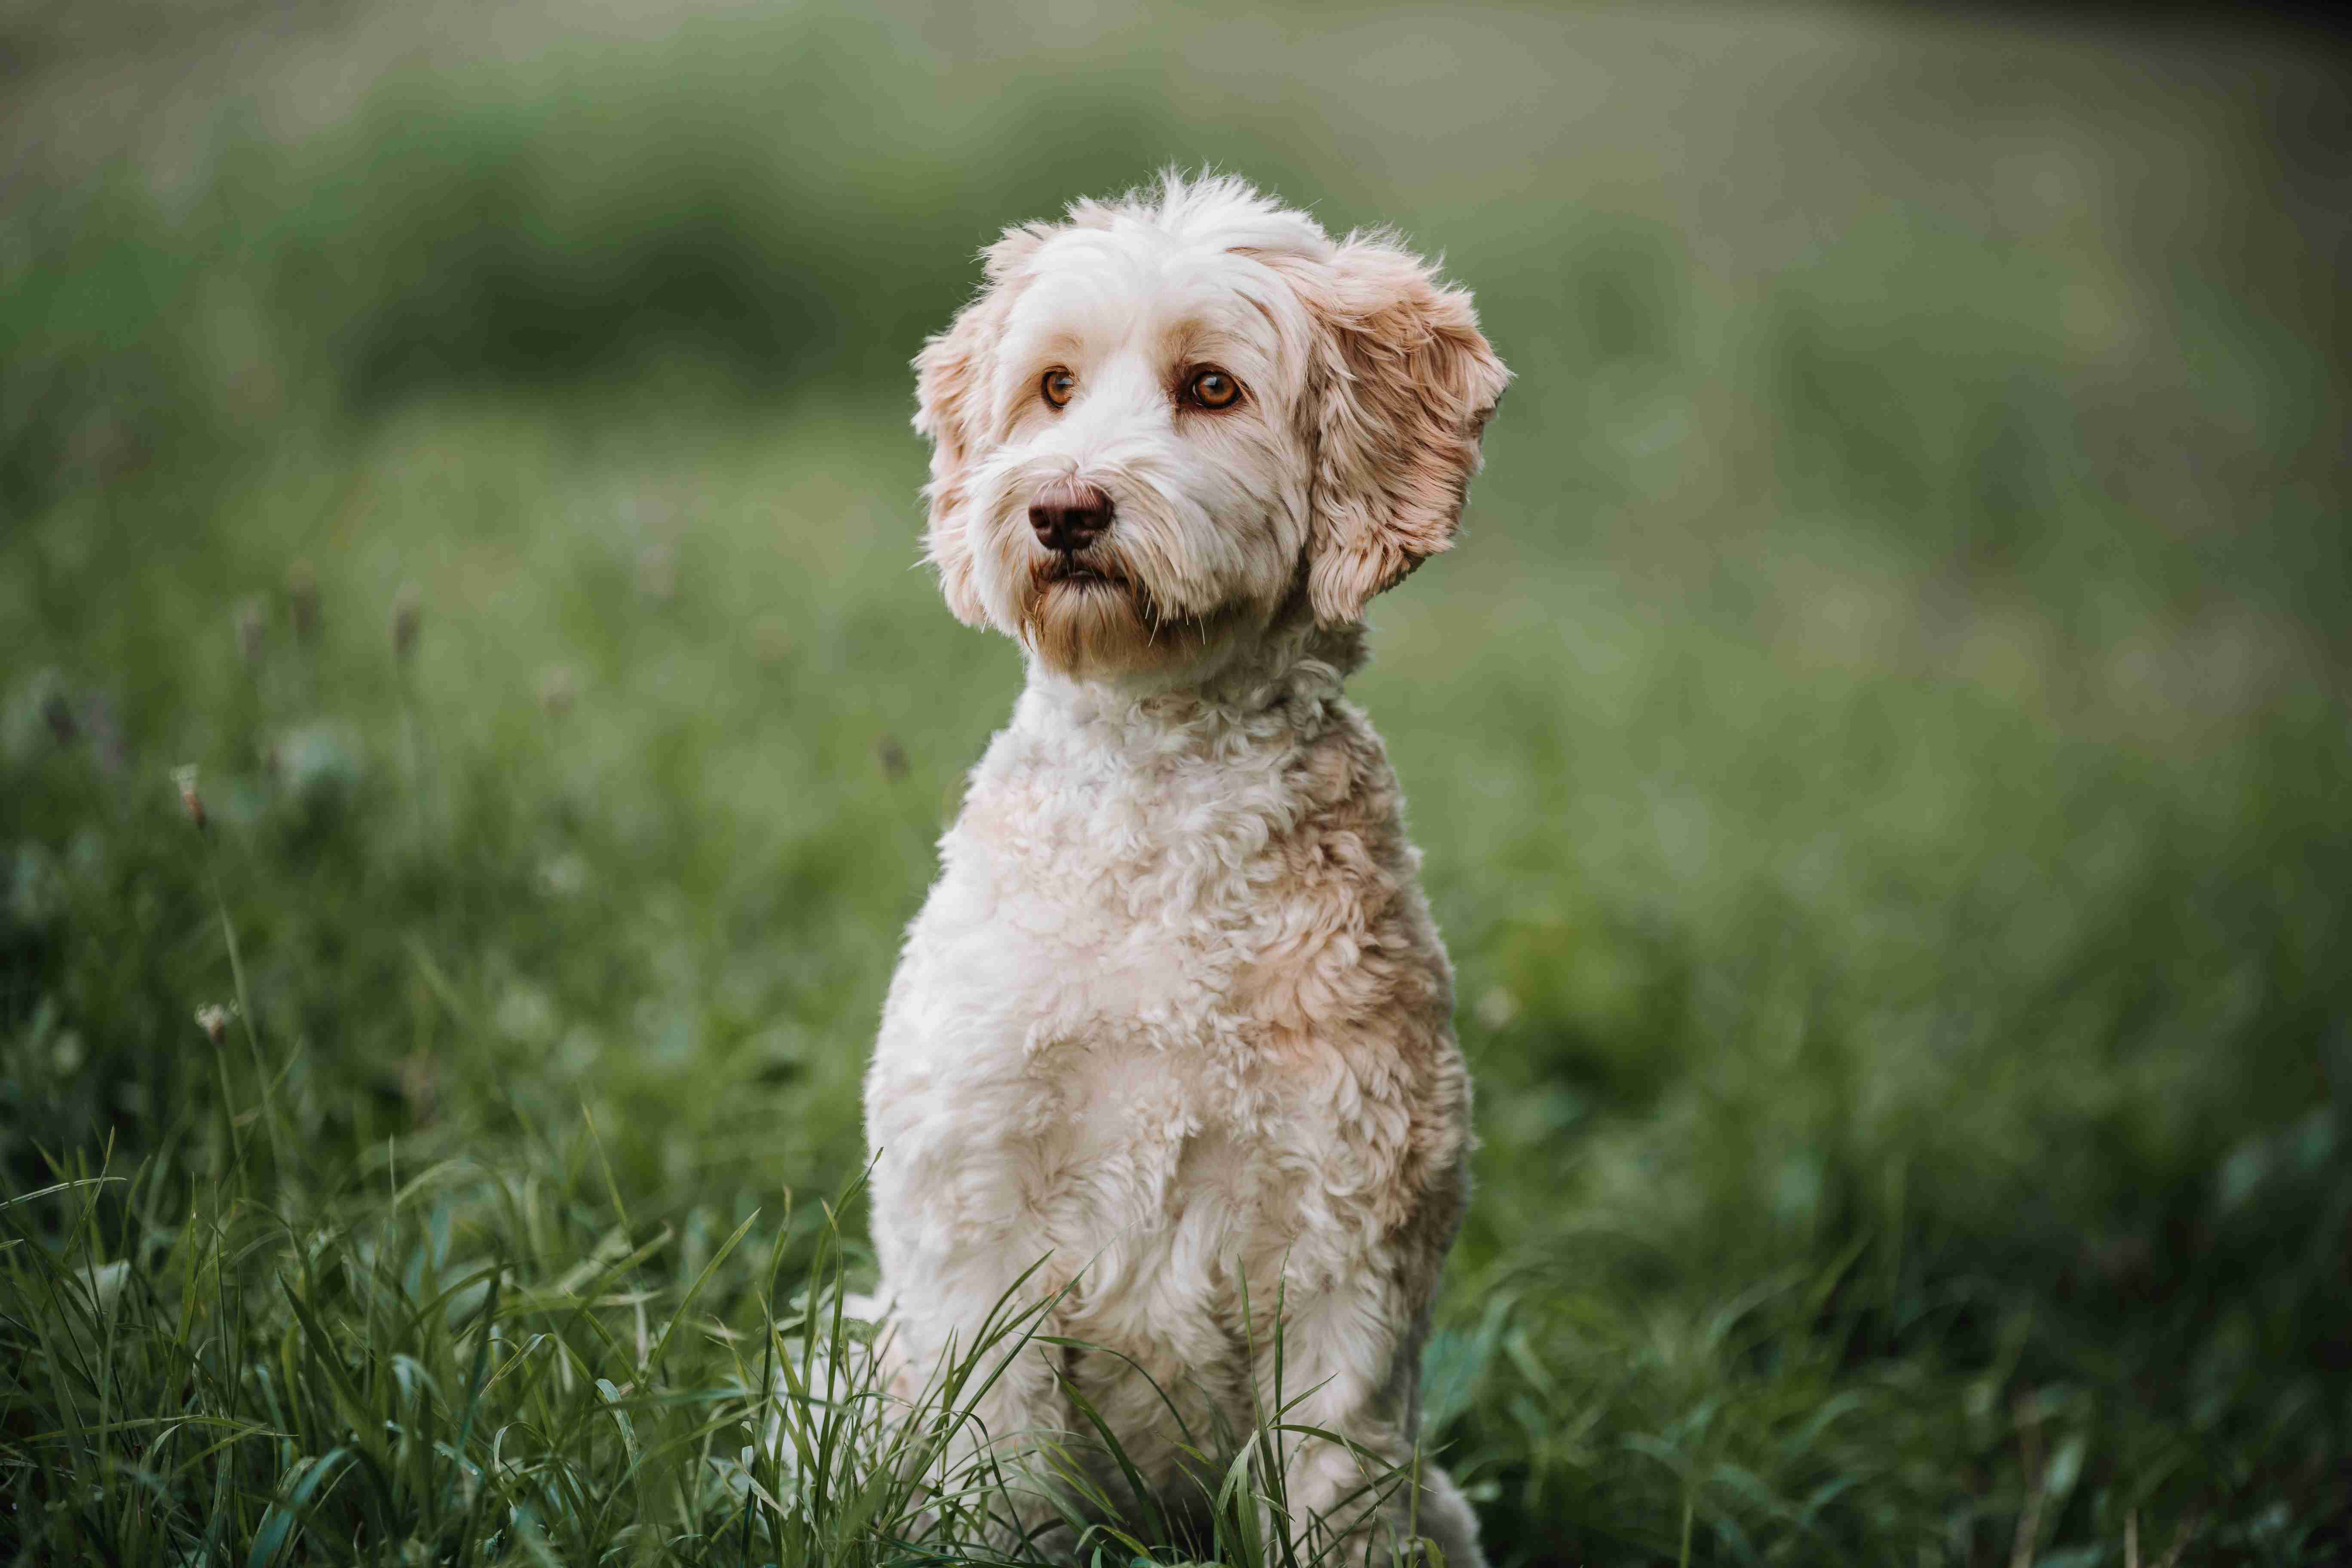 Can Poodles develop kidney disease, and how can it be diagnosed and treated?